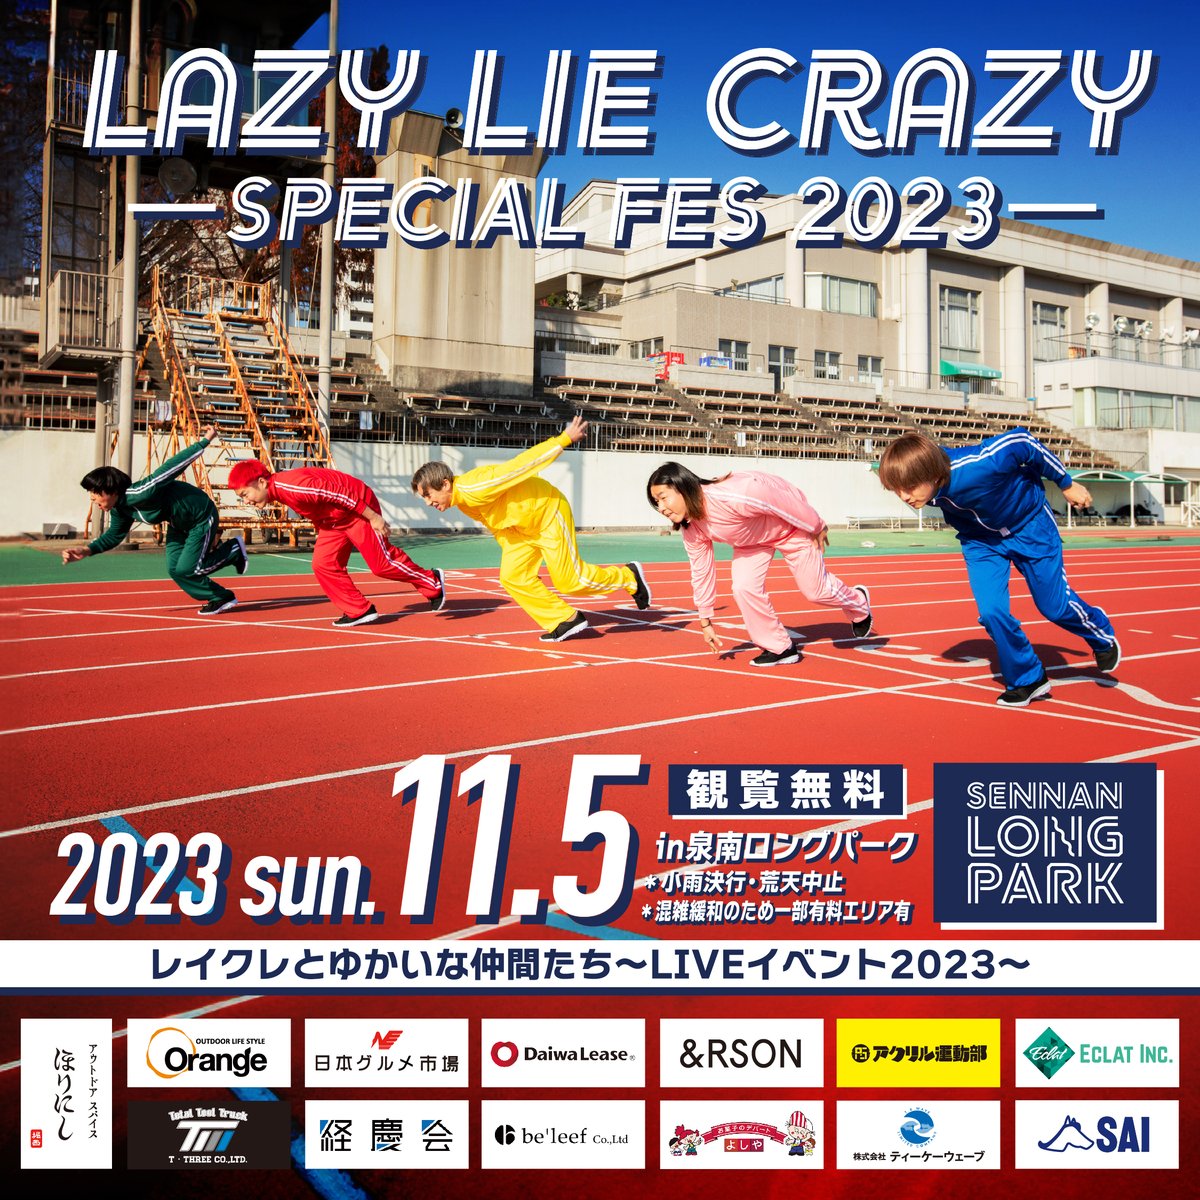 LAZY LIE CRAZY主催イベント「LAZY LIE CRAZY-SPECIAL FES 2023-」にオトむしゃの出演が決定！